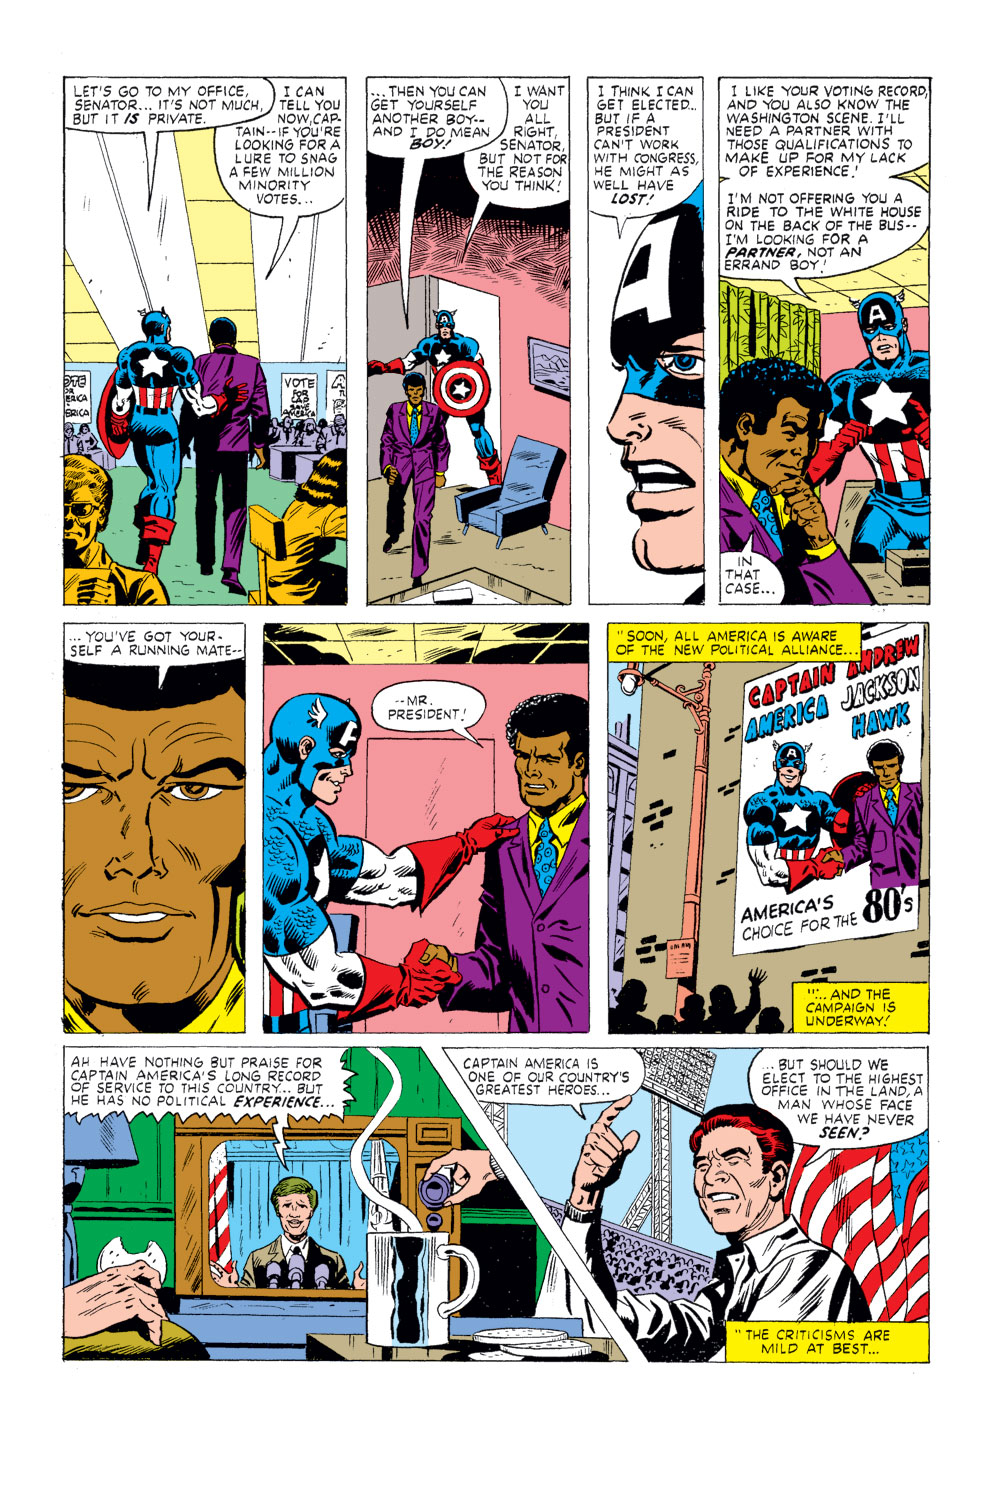 What If? (1977) issue 26 - Captain America had been elected president - Page 7